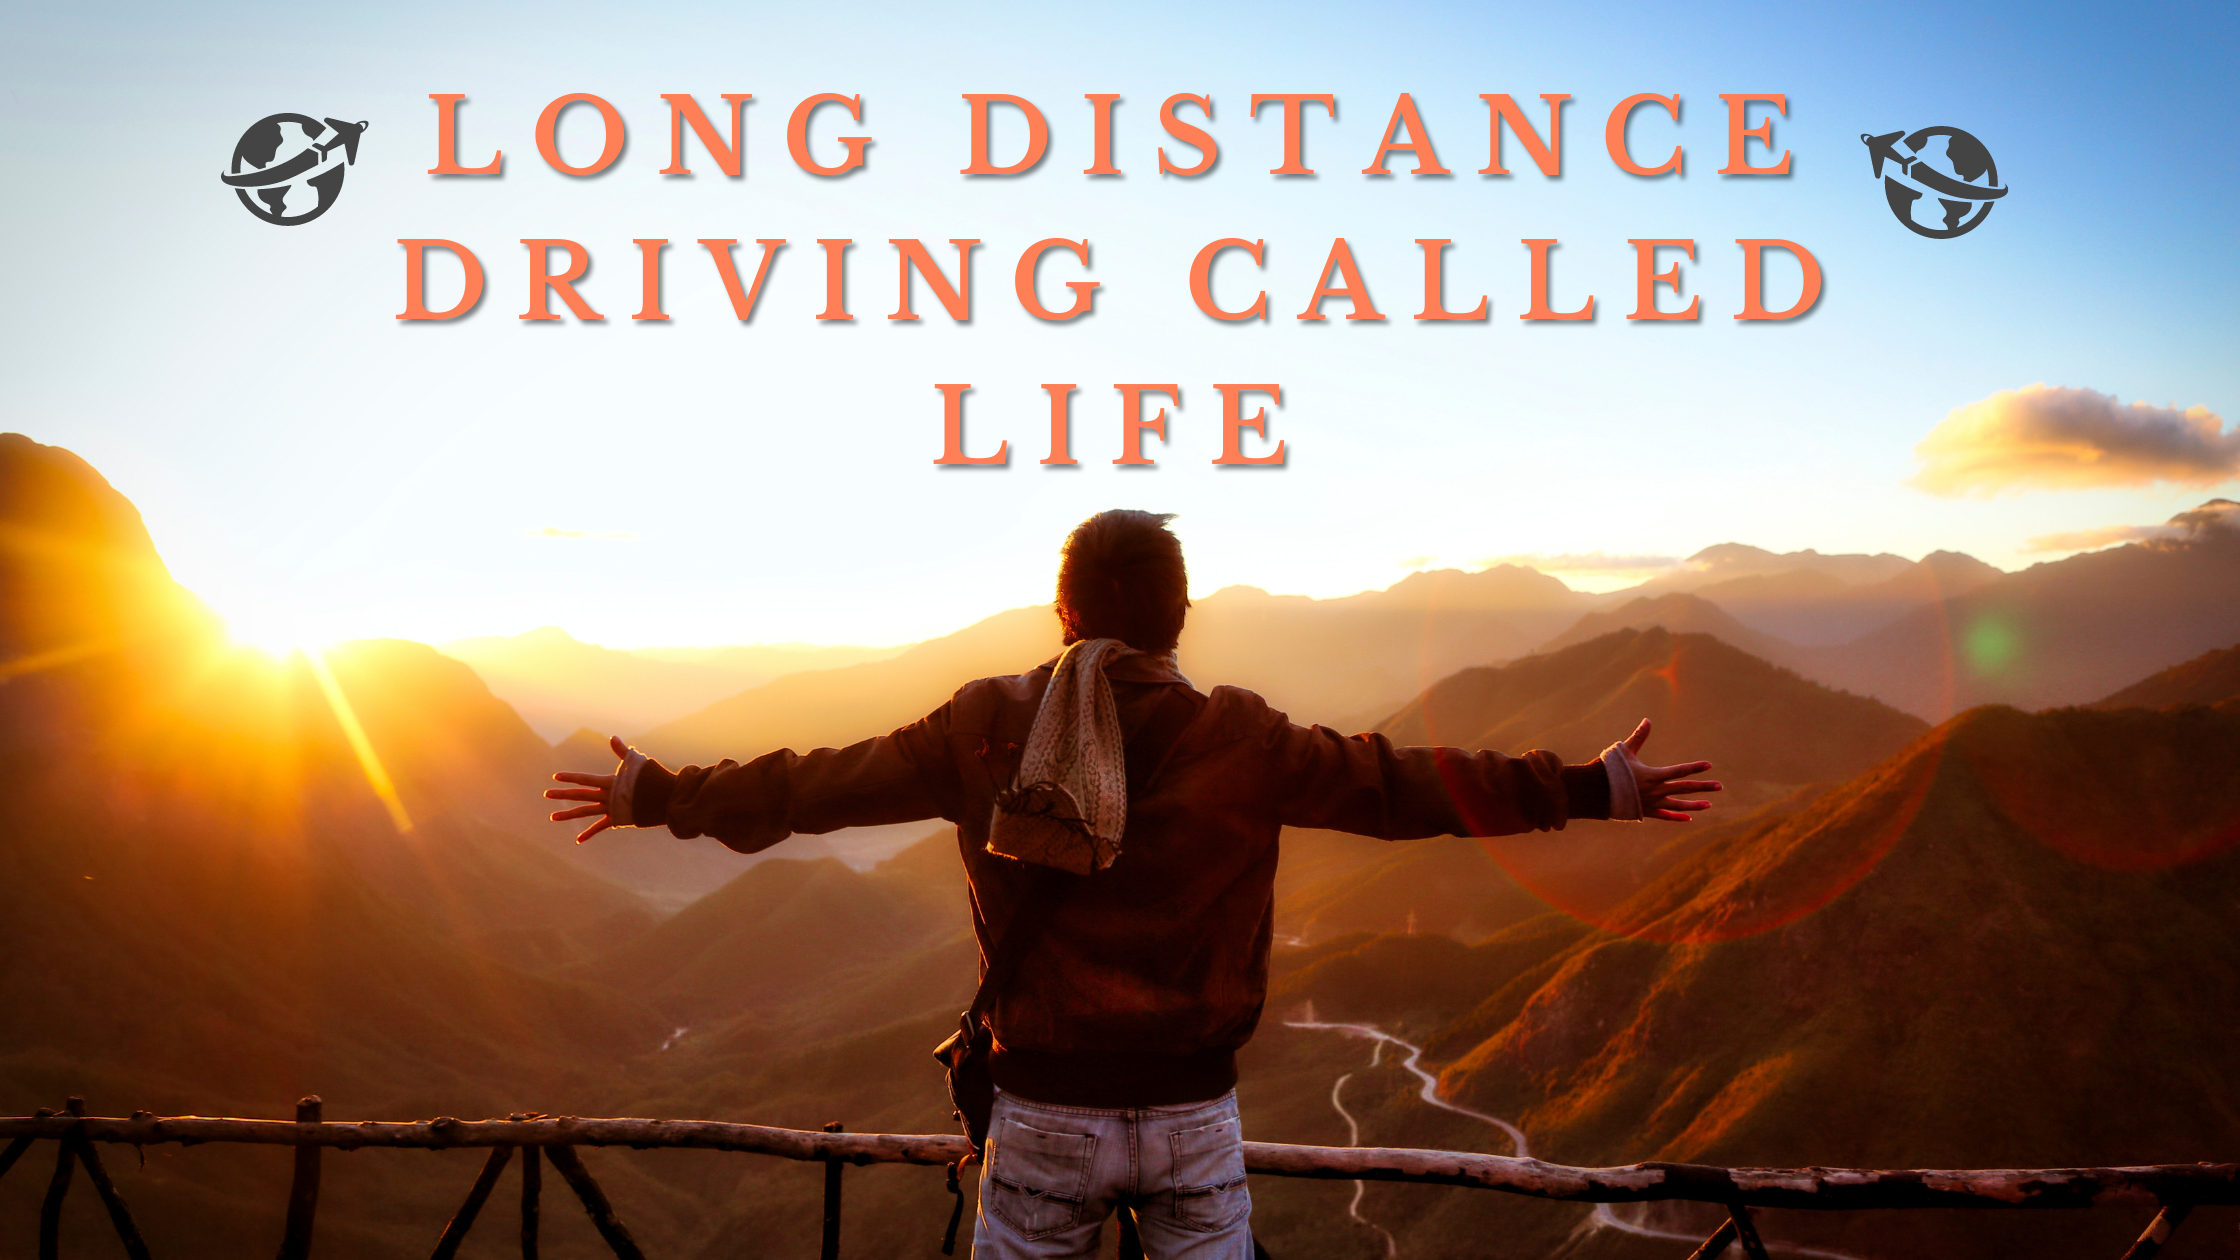 Long distance driving called Life